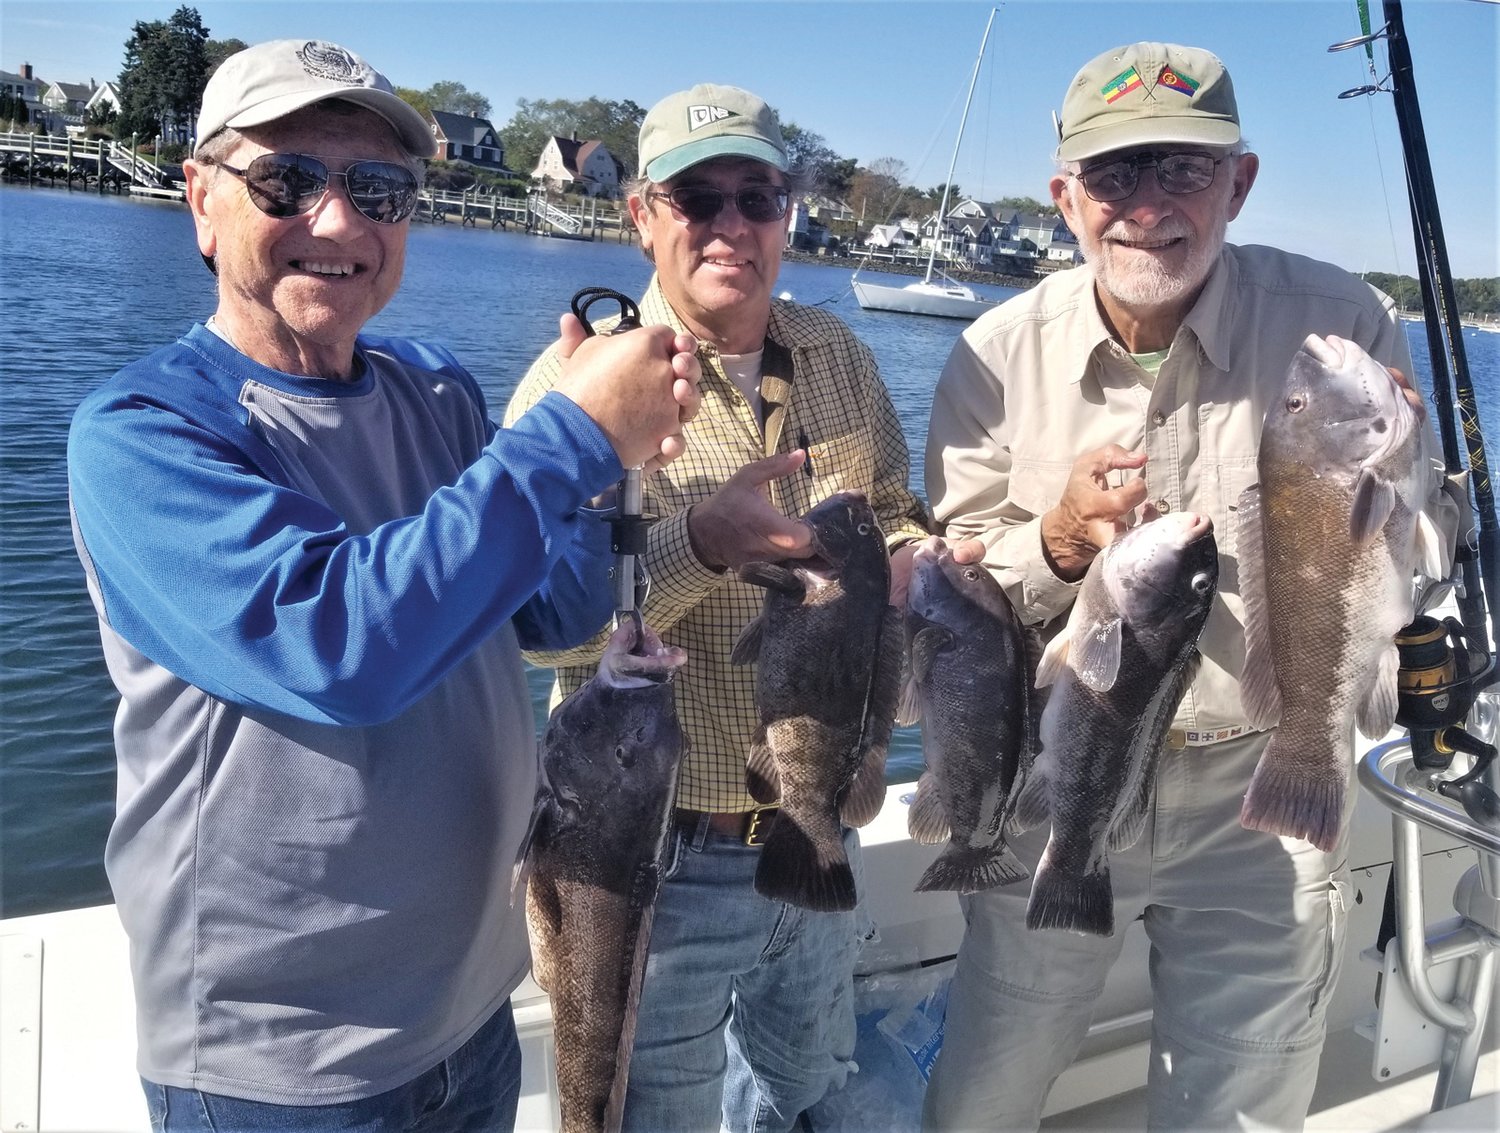 TAUTOG JUNKIES: Chris Deacutis with the 23-inch tautog he caught fishing with Hal Walker and Walt Galloway off Newport this October. The trio caught their ten fish boat limit. 